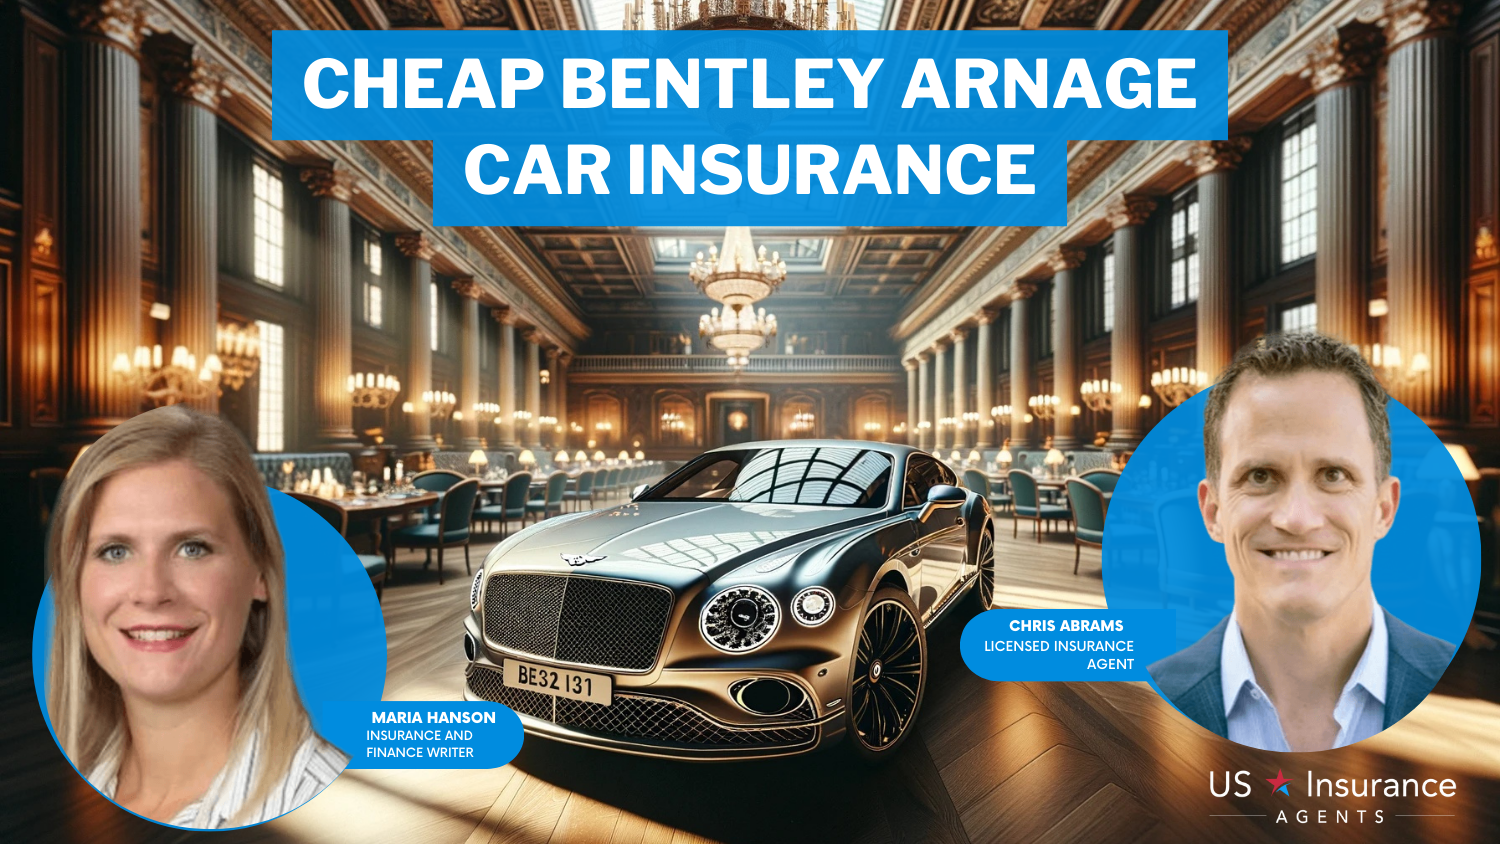 Progressive, State Farm, and Nationwide: Cheap Bentley Arnage Car Insurance